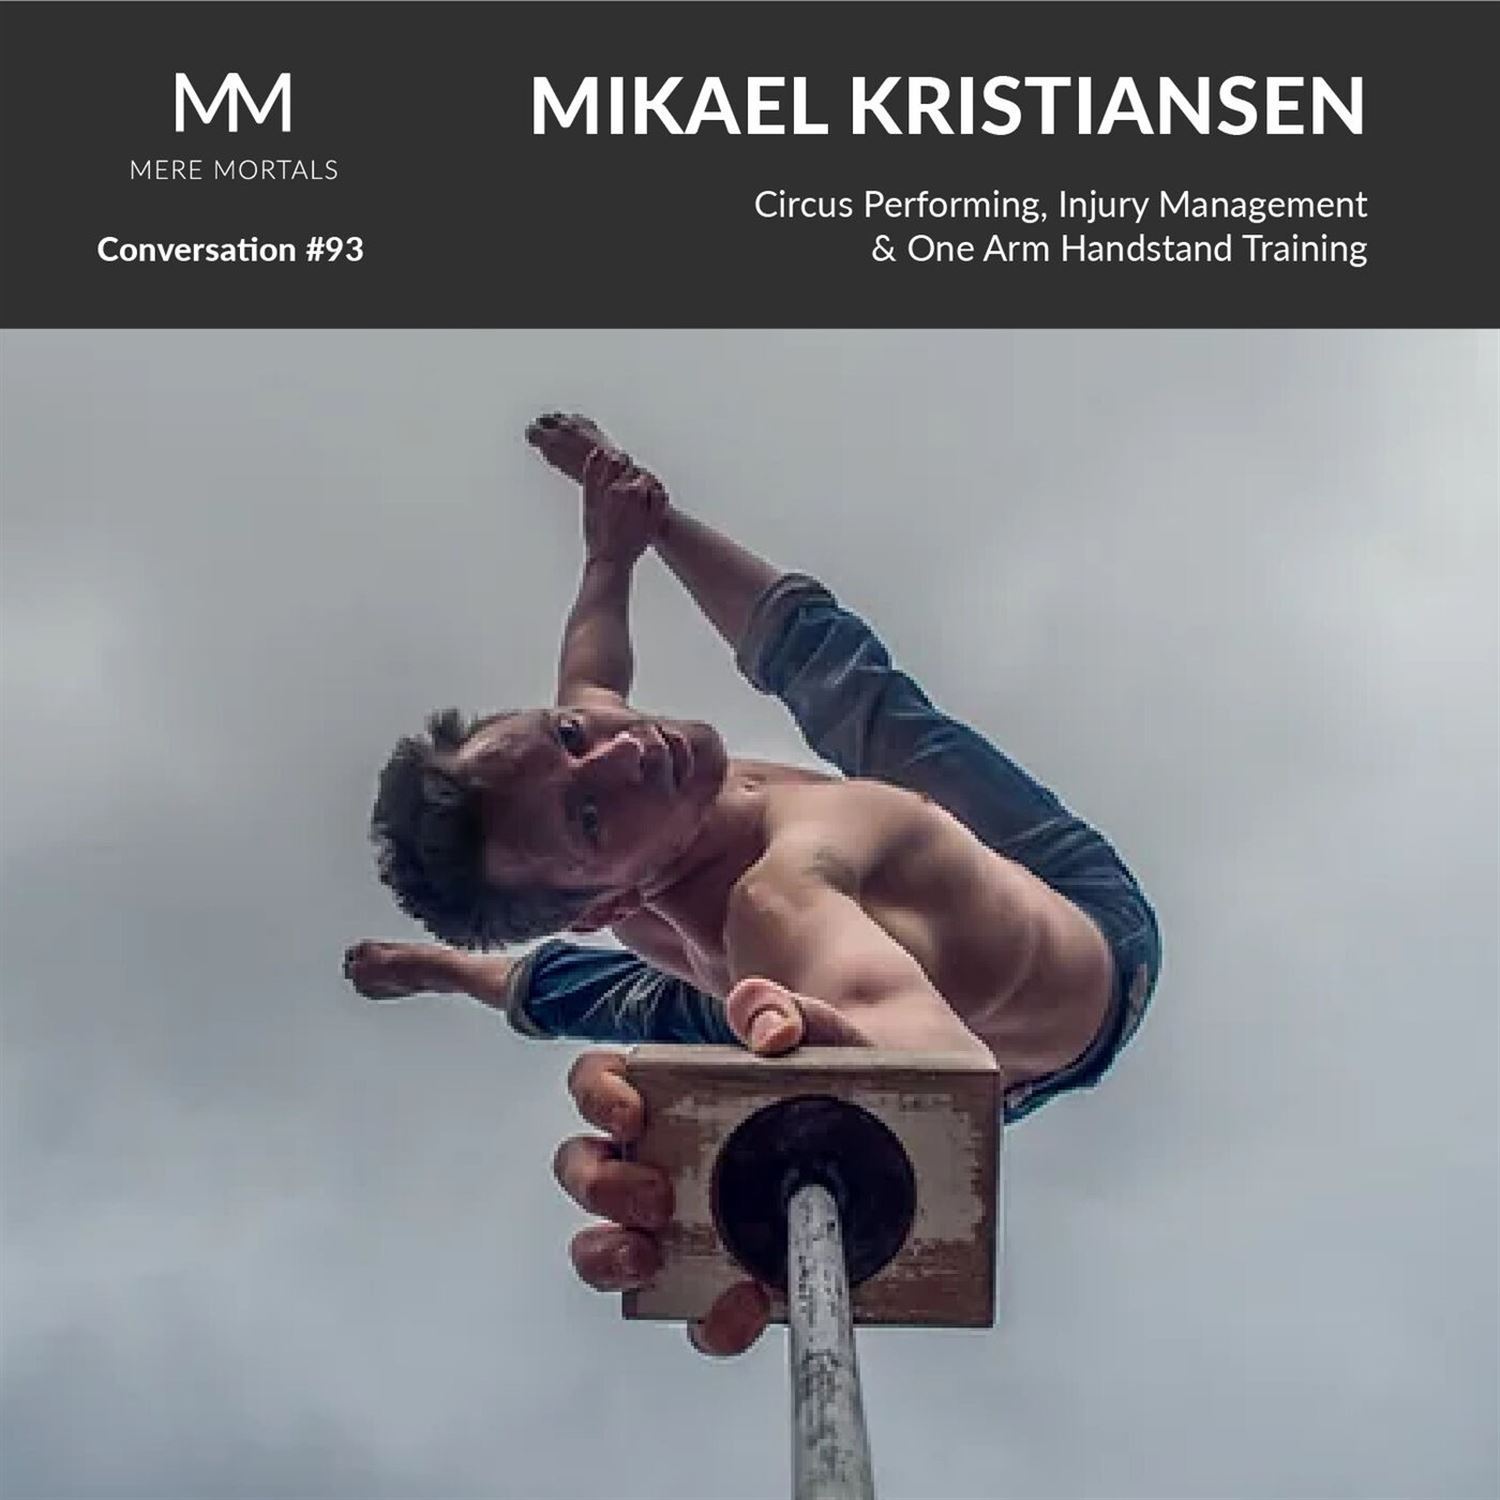 MIKAEL KRISTIANSEN | Circus Performing, Injury Management & One Arm Handstand Training